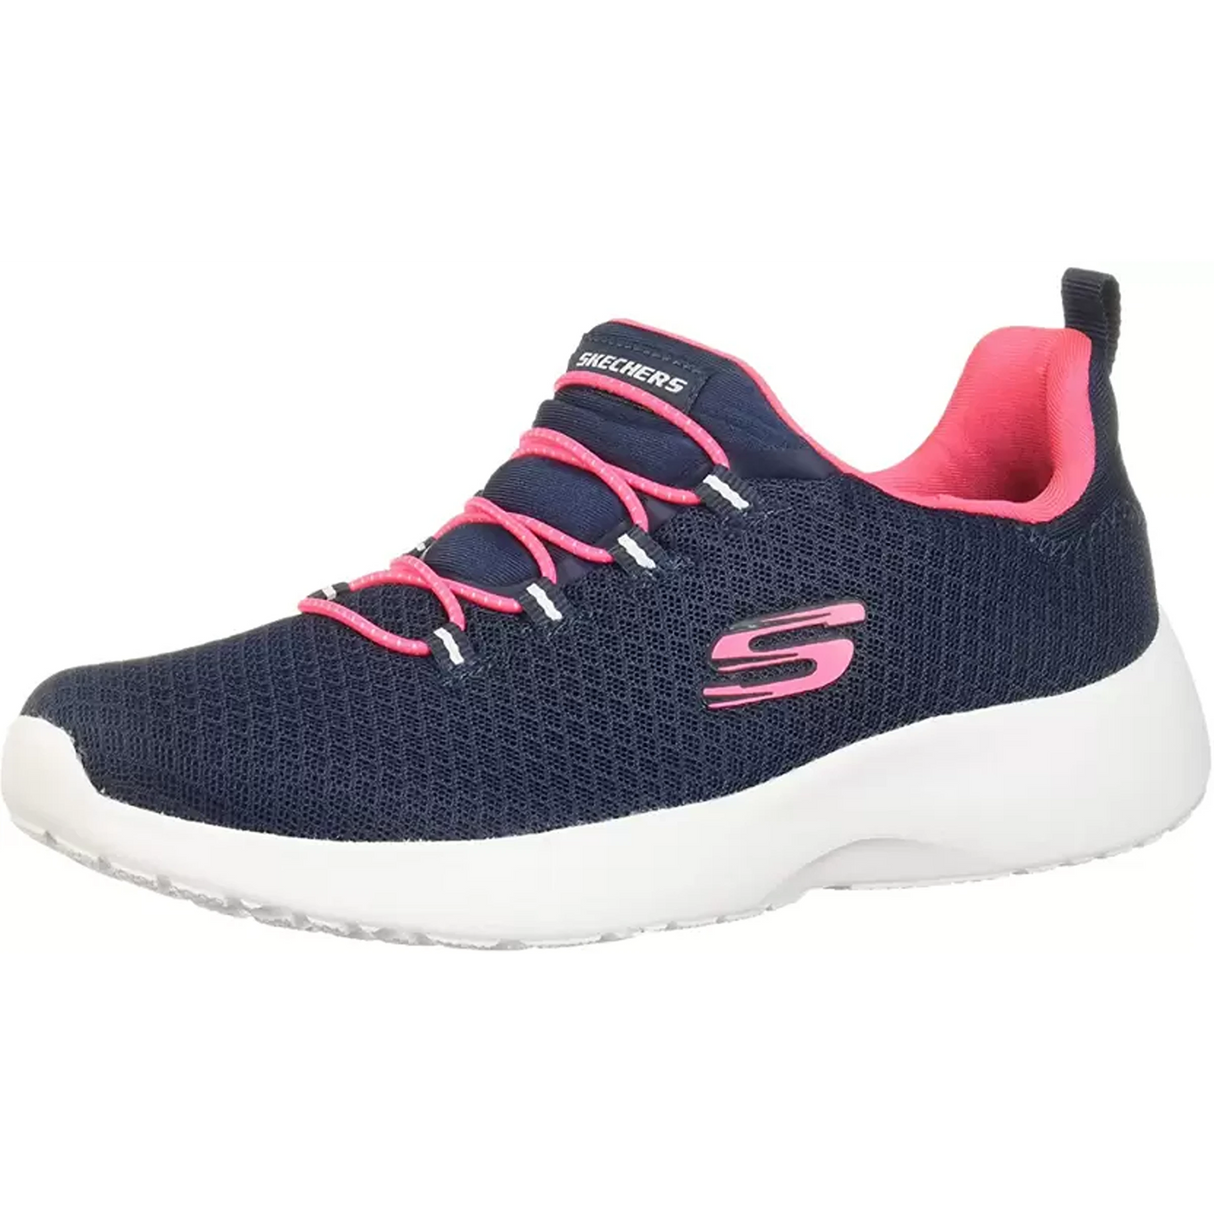 SKECHERS DYNAMIGHT Walking Shoes For Women  (Navy, Pink) (12119-NVHP)